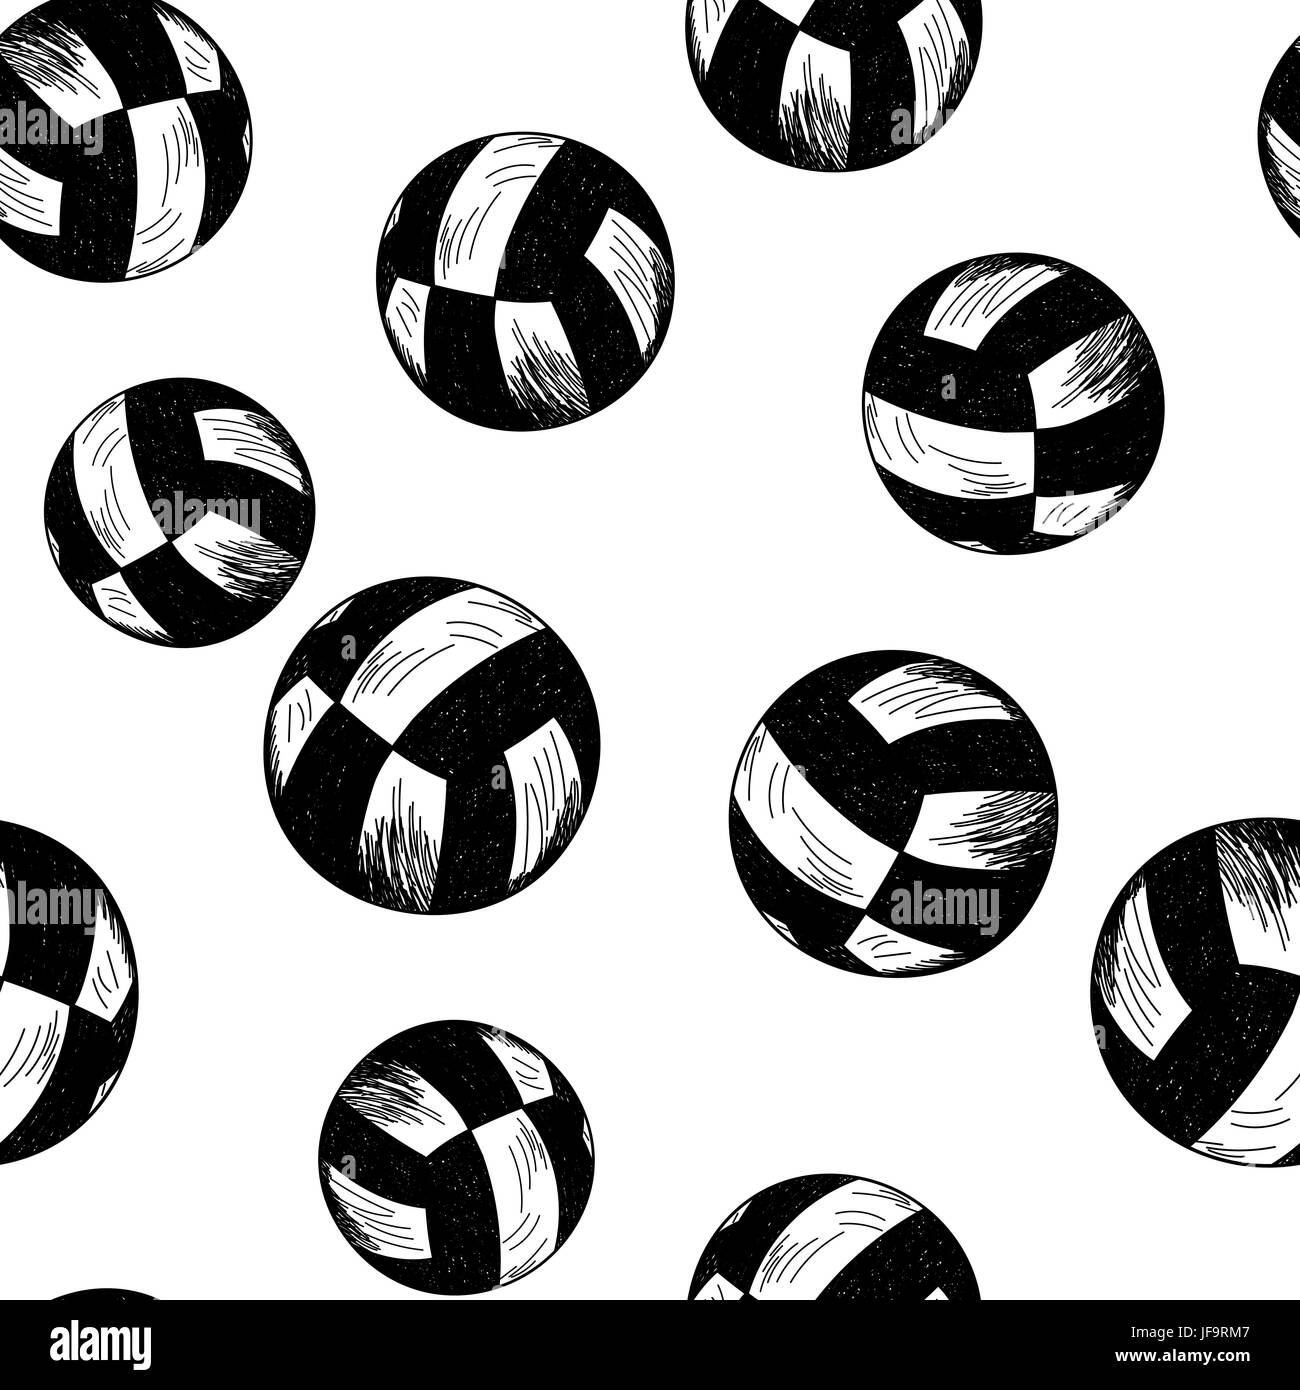 Volleyball theme seamless Stock Vector